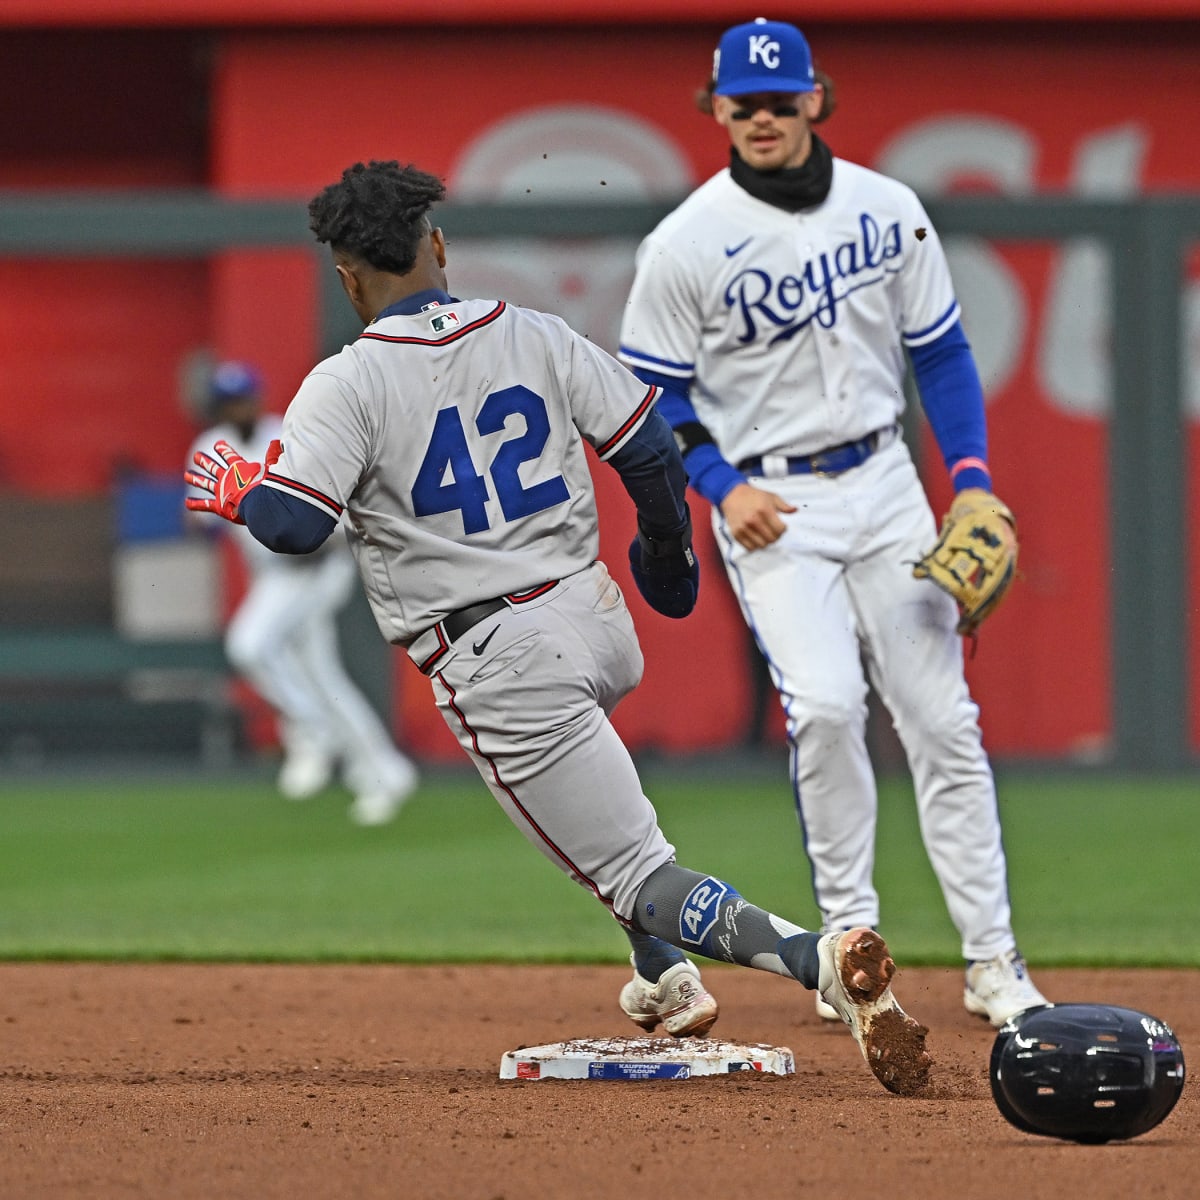 NL East champion Braves romp to 10-2 win over Royals